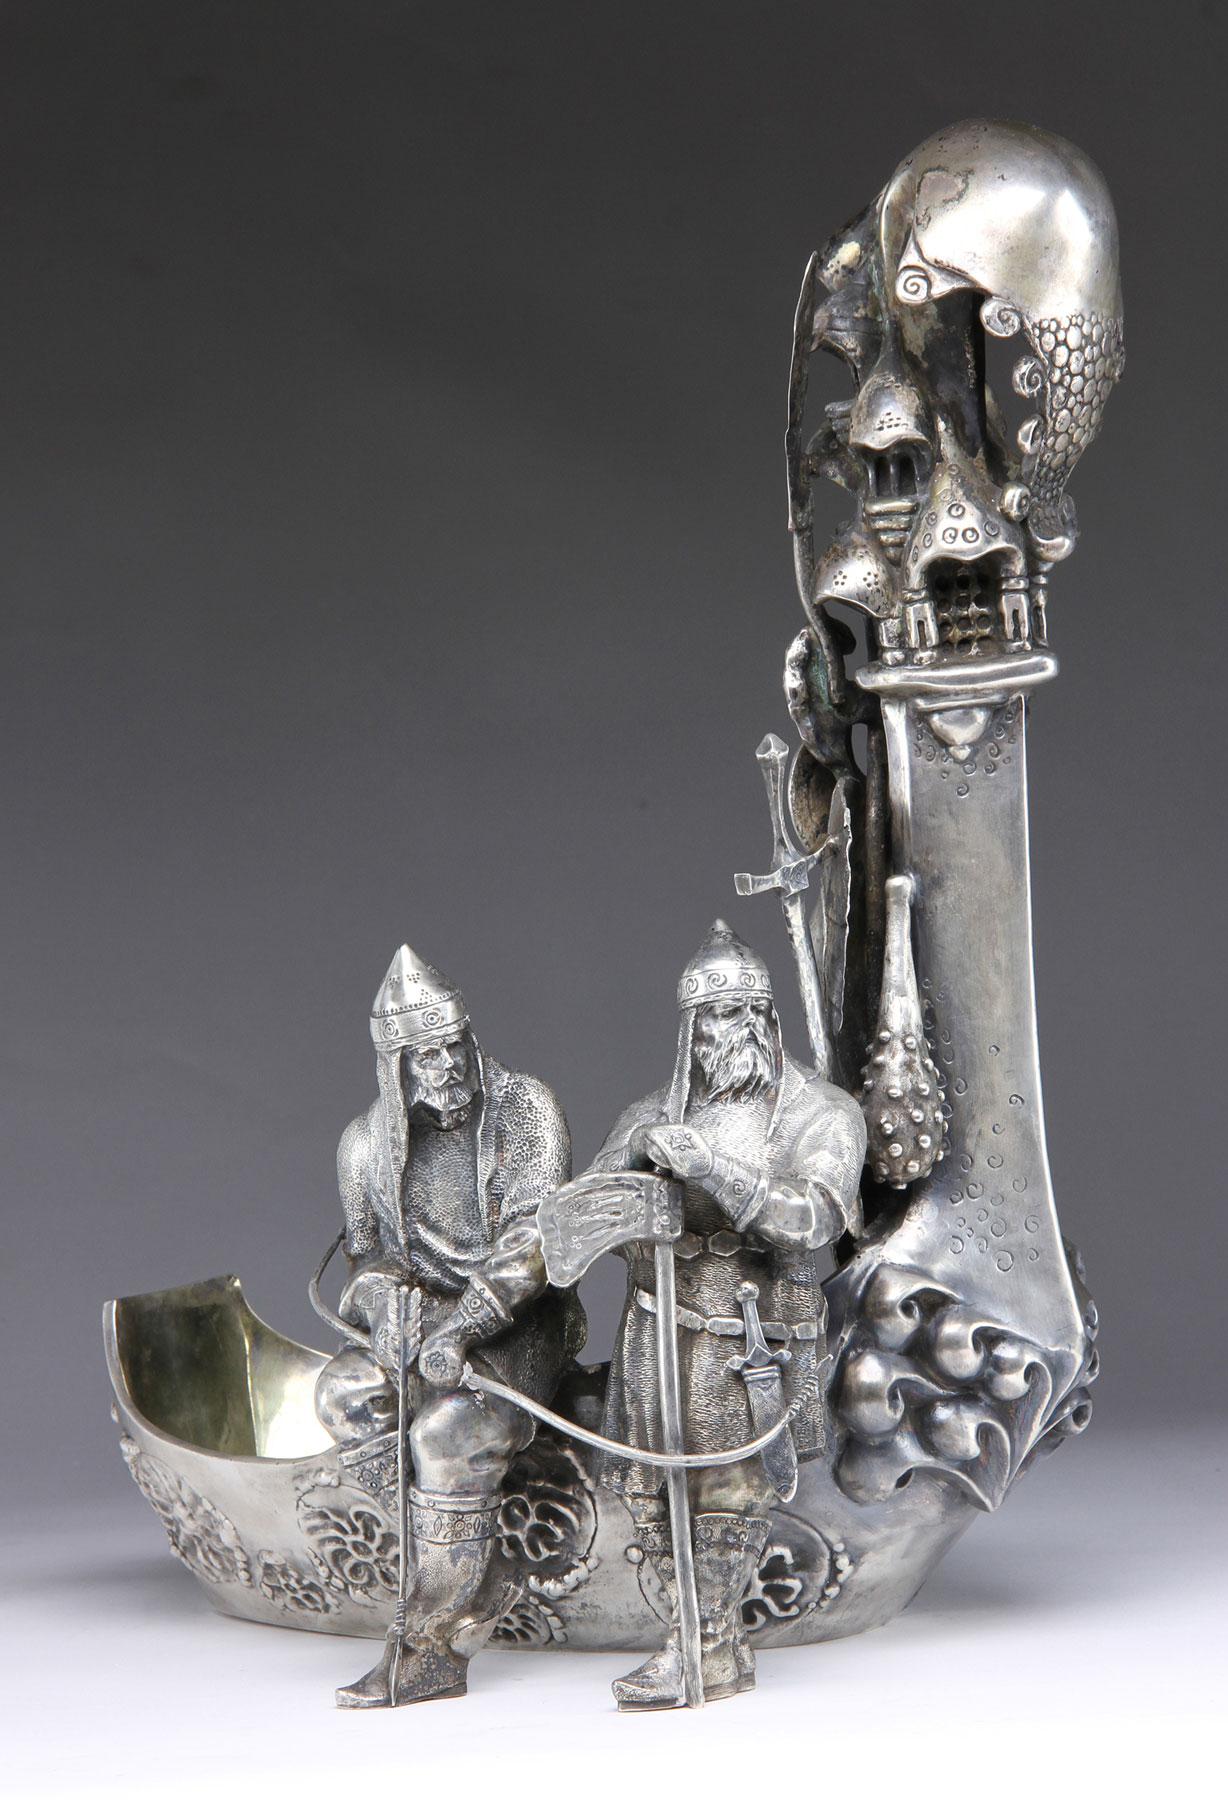 19th Century Russian solid silver kovsh, showing two Vikings with armor